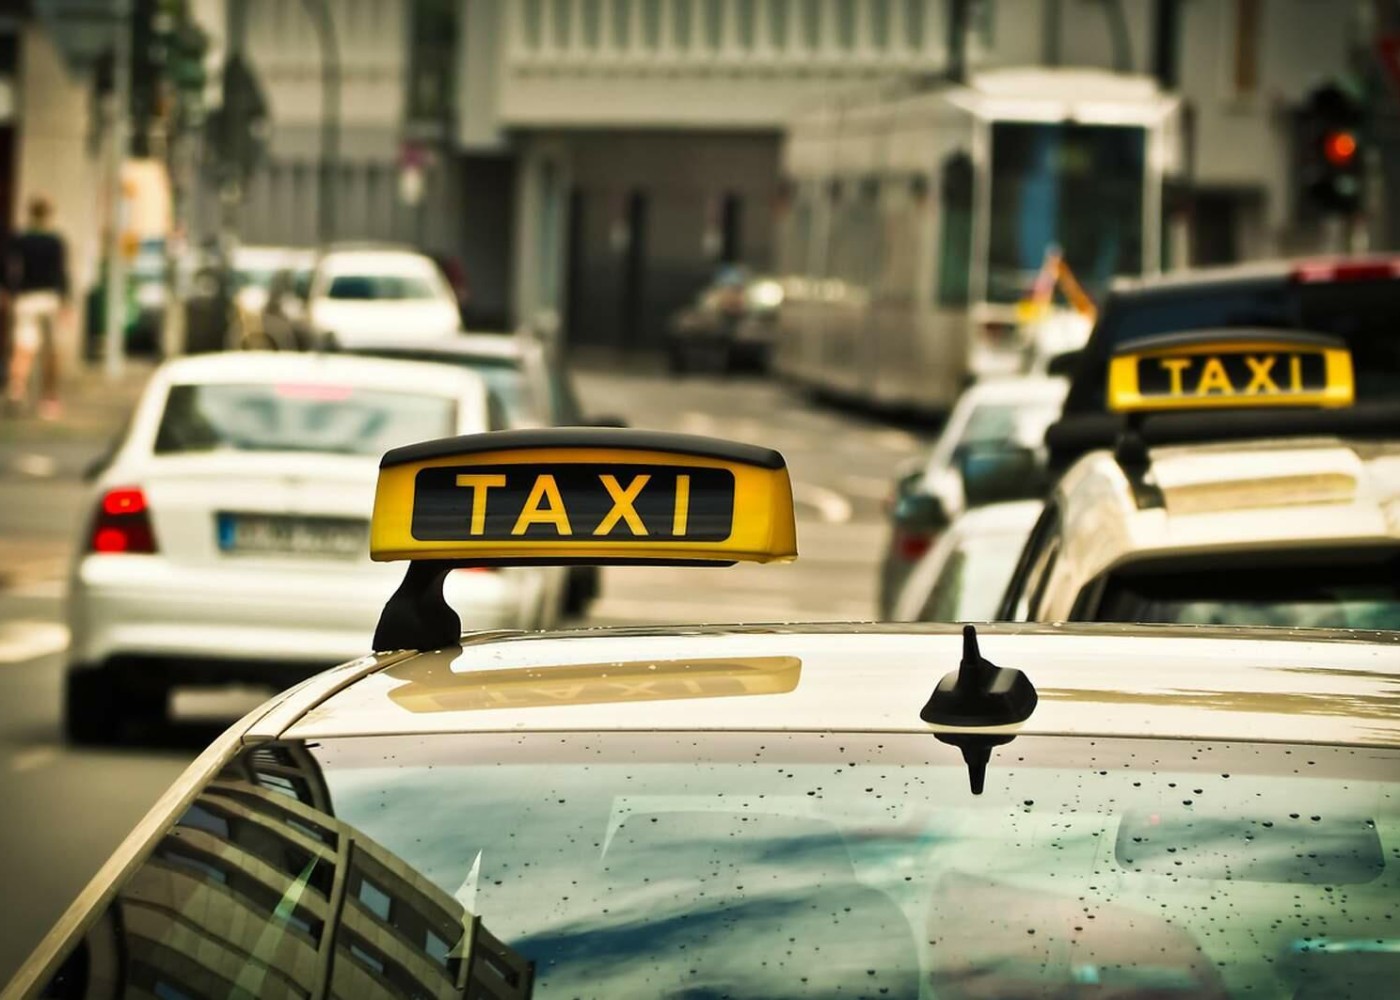 image-1692348096-taxi